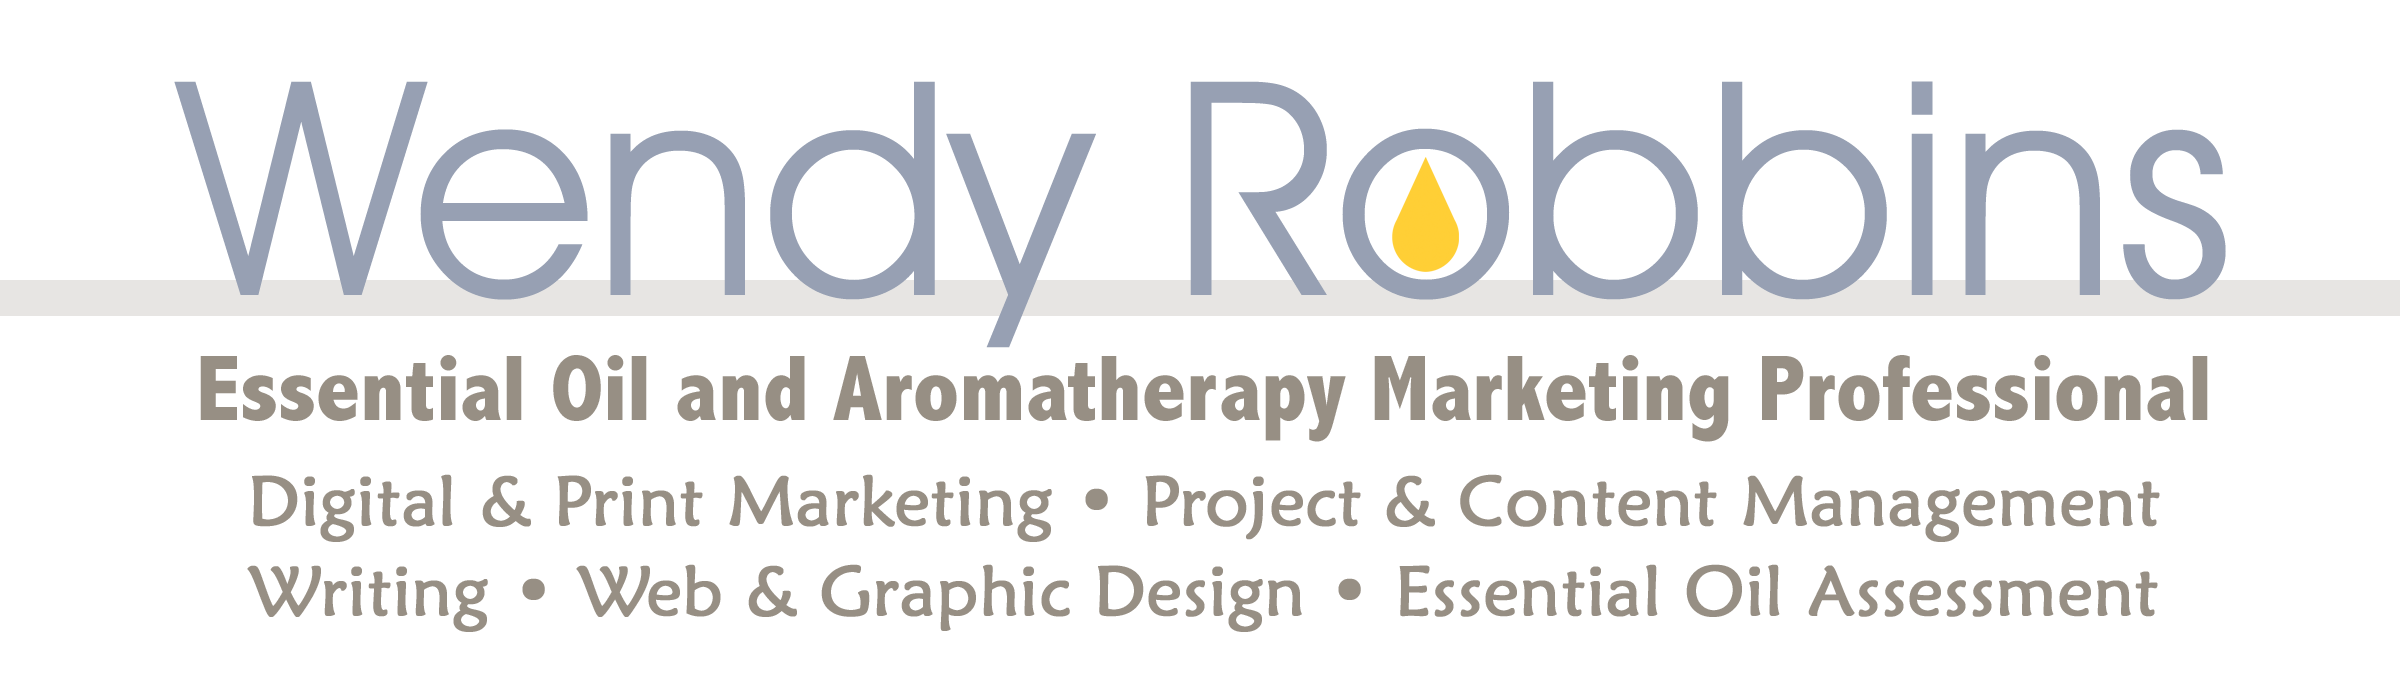 Resume of Wendy Robbins - Aromatherapy, Essential Oil and Natural Ingredient Marketing Professional